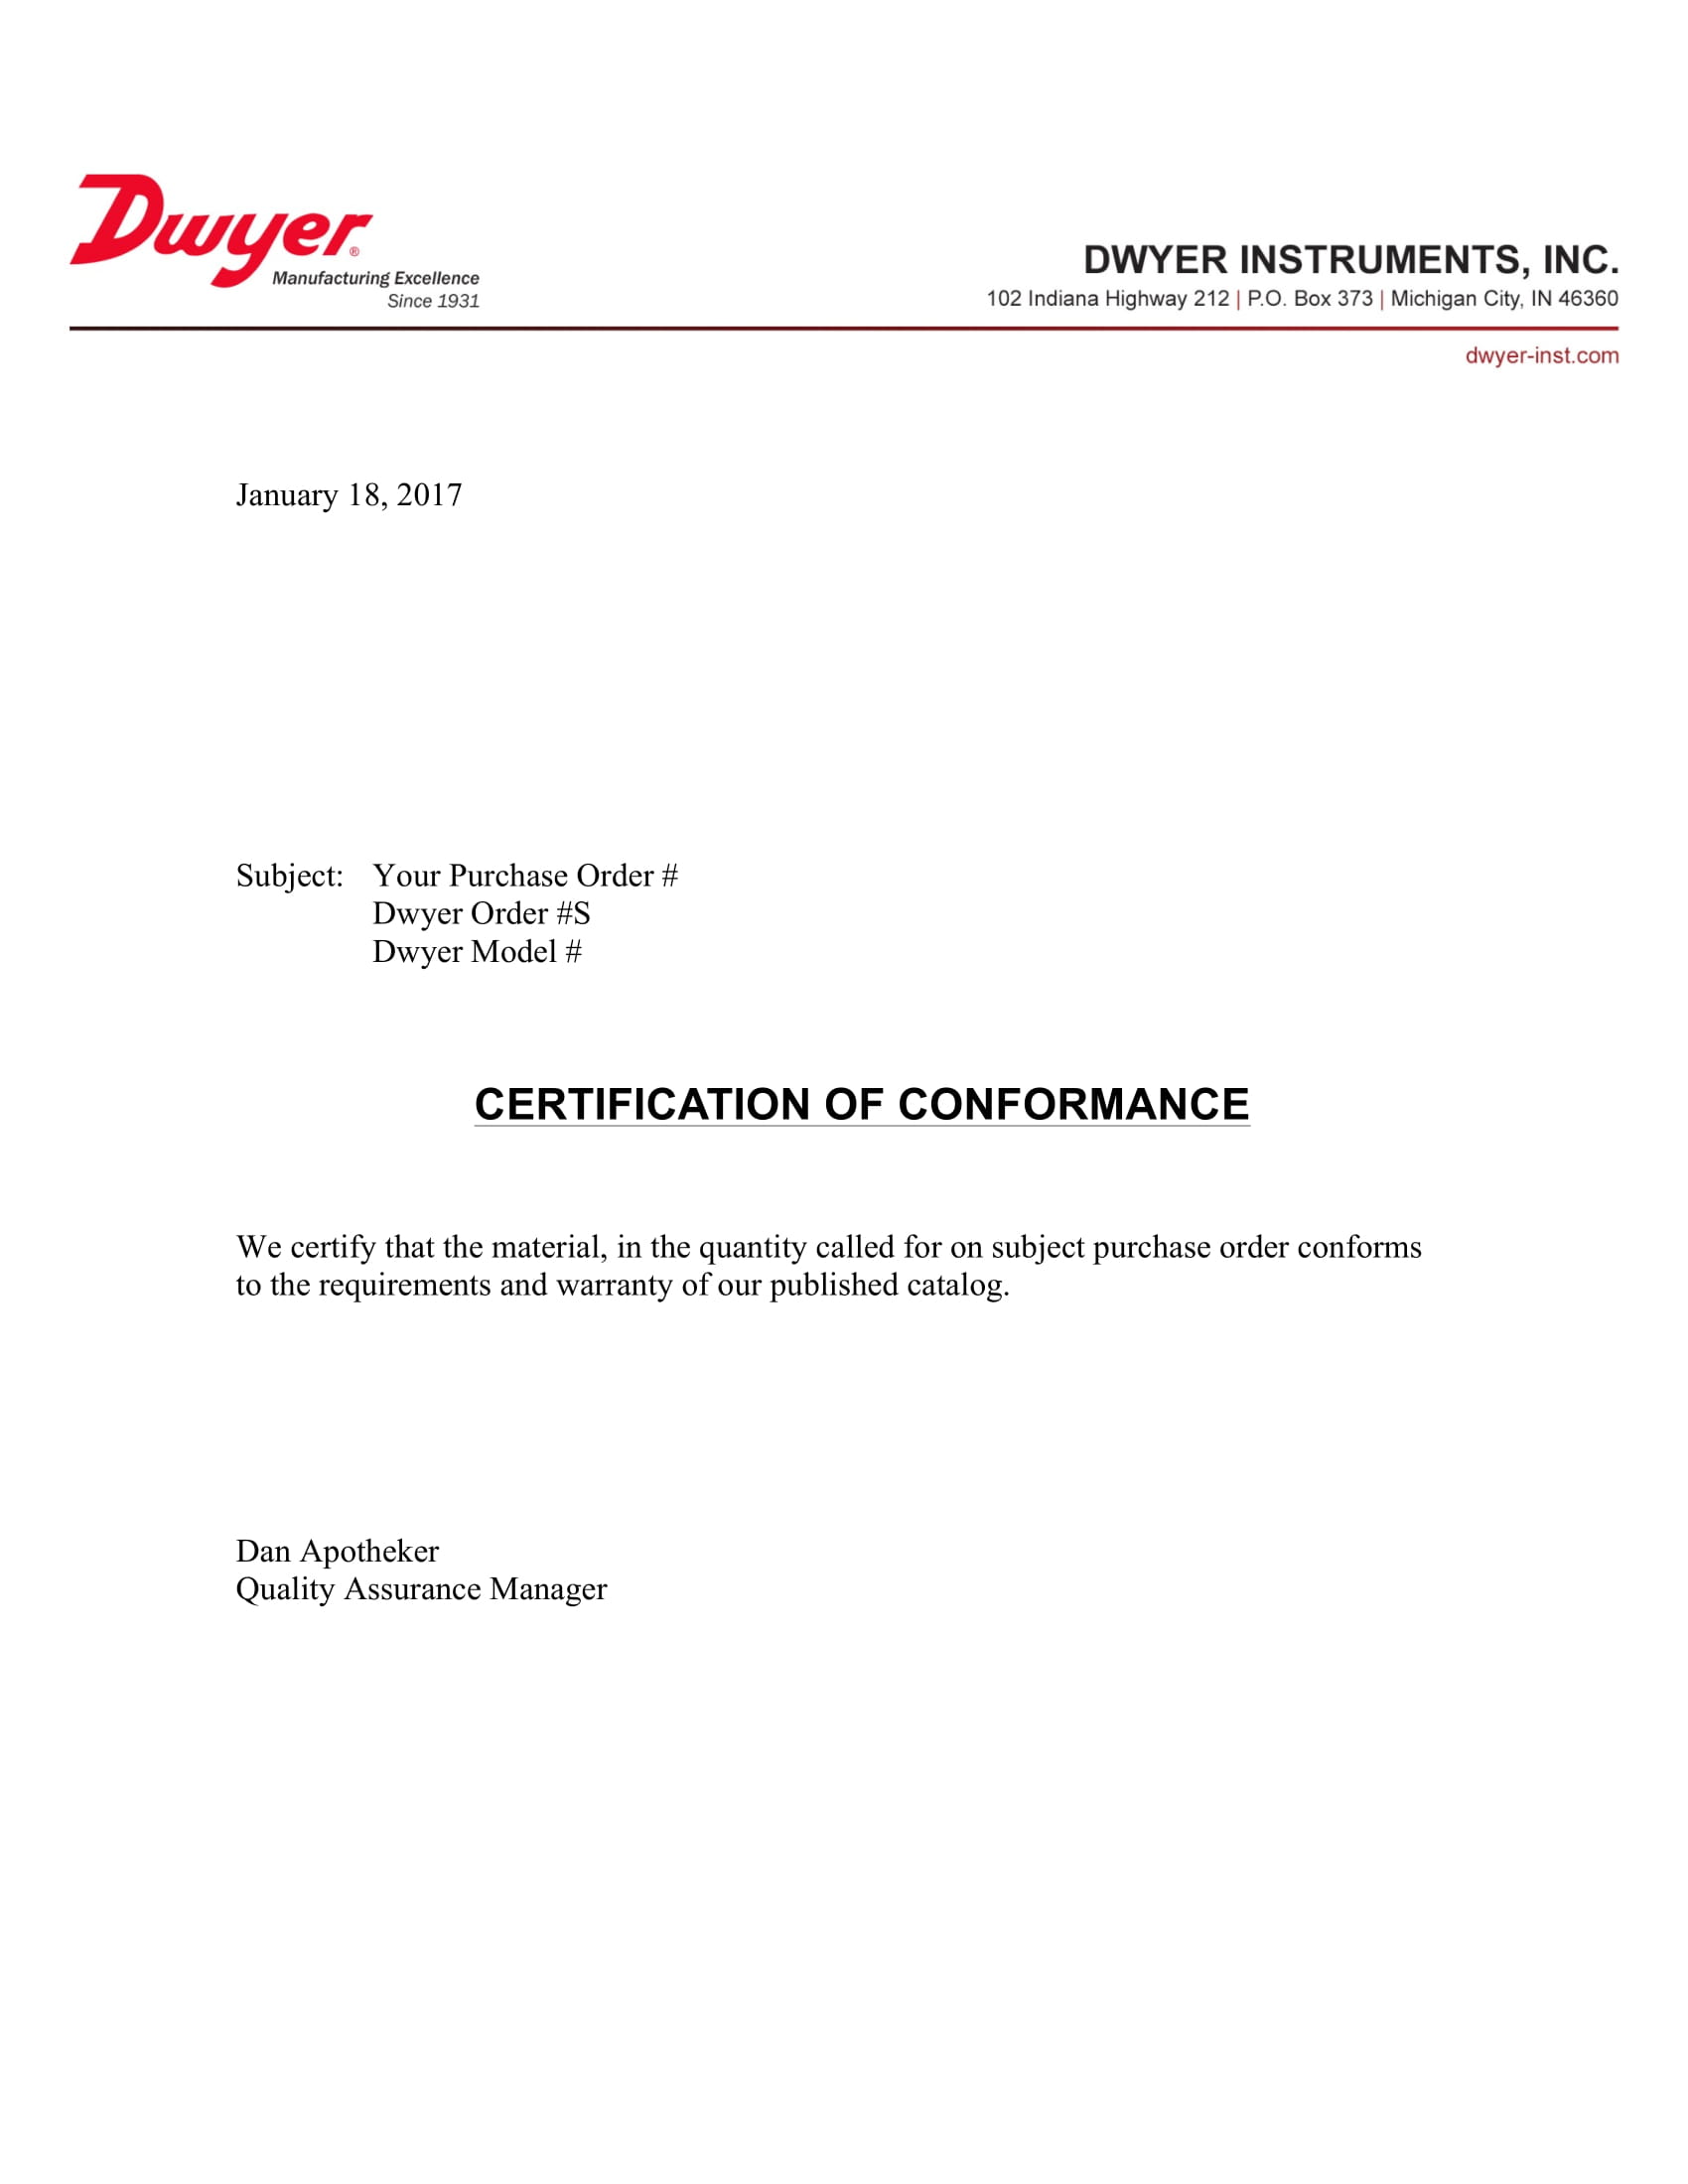 Concise Certificate of Conformance Example